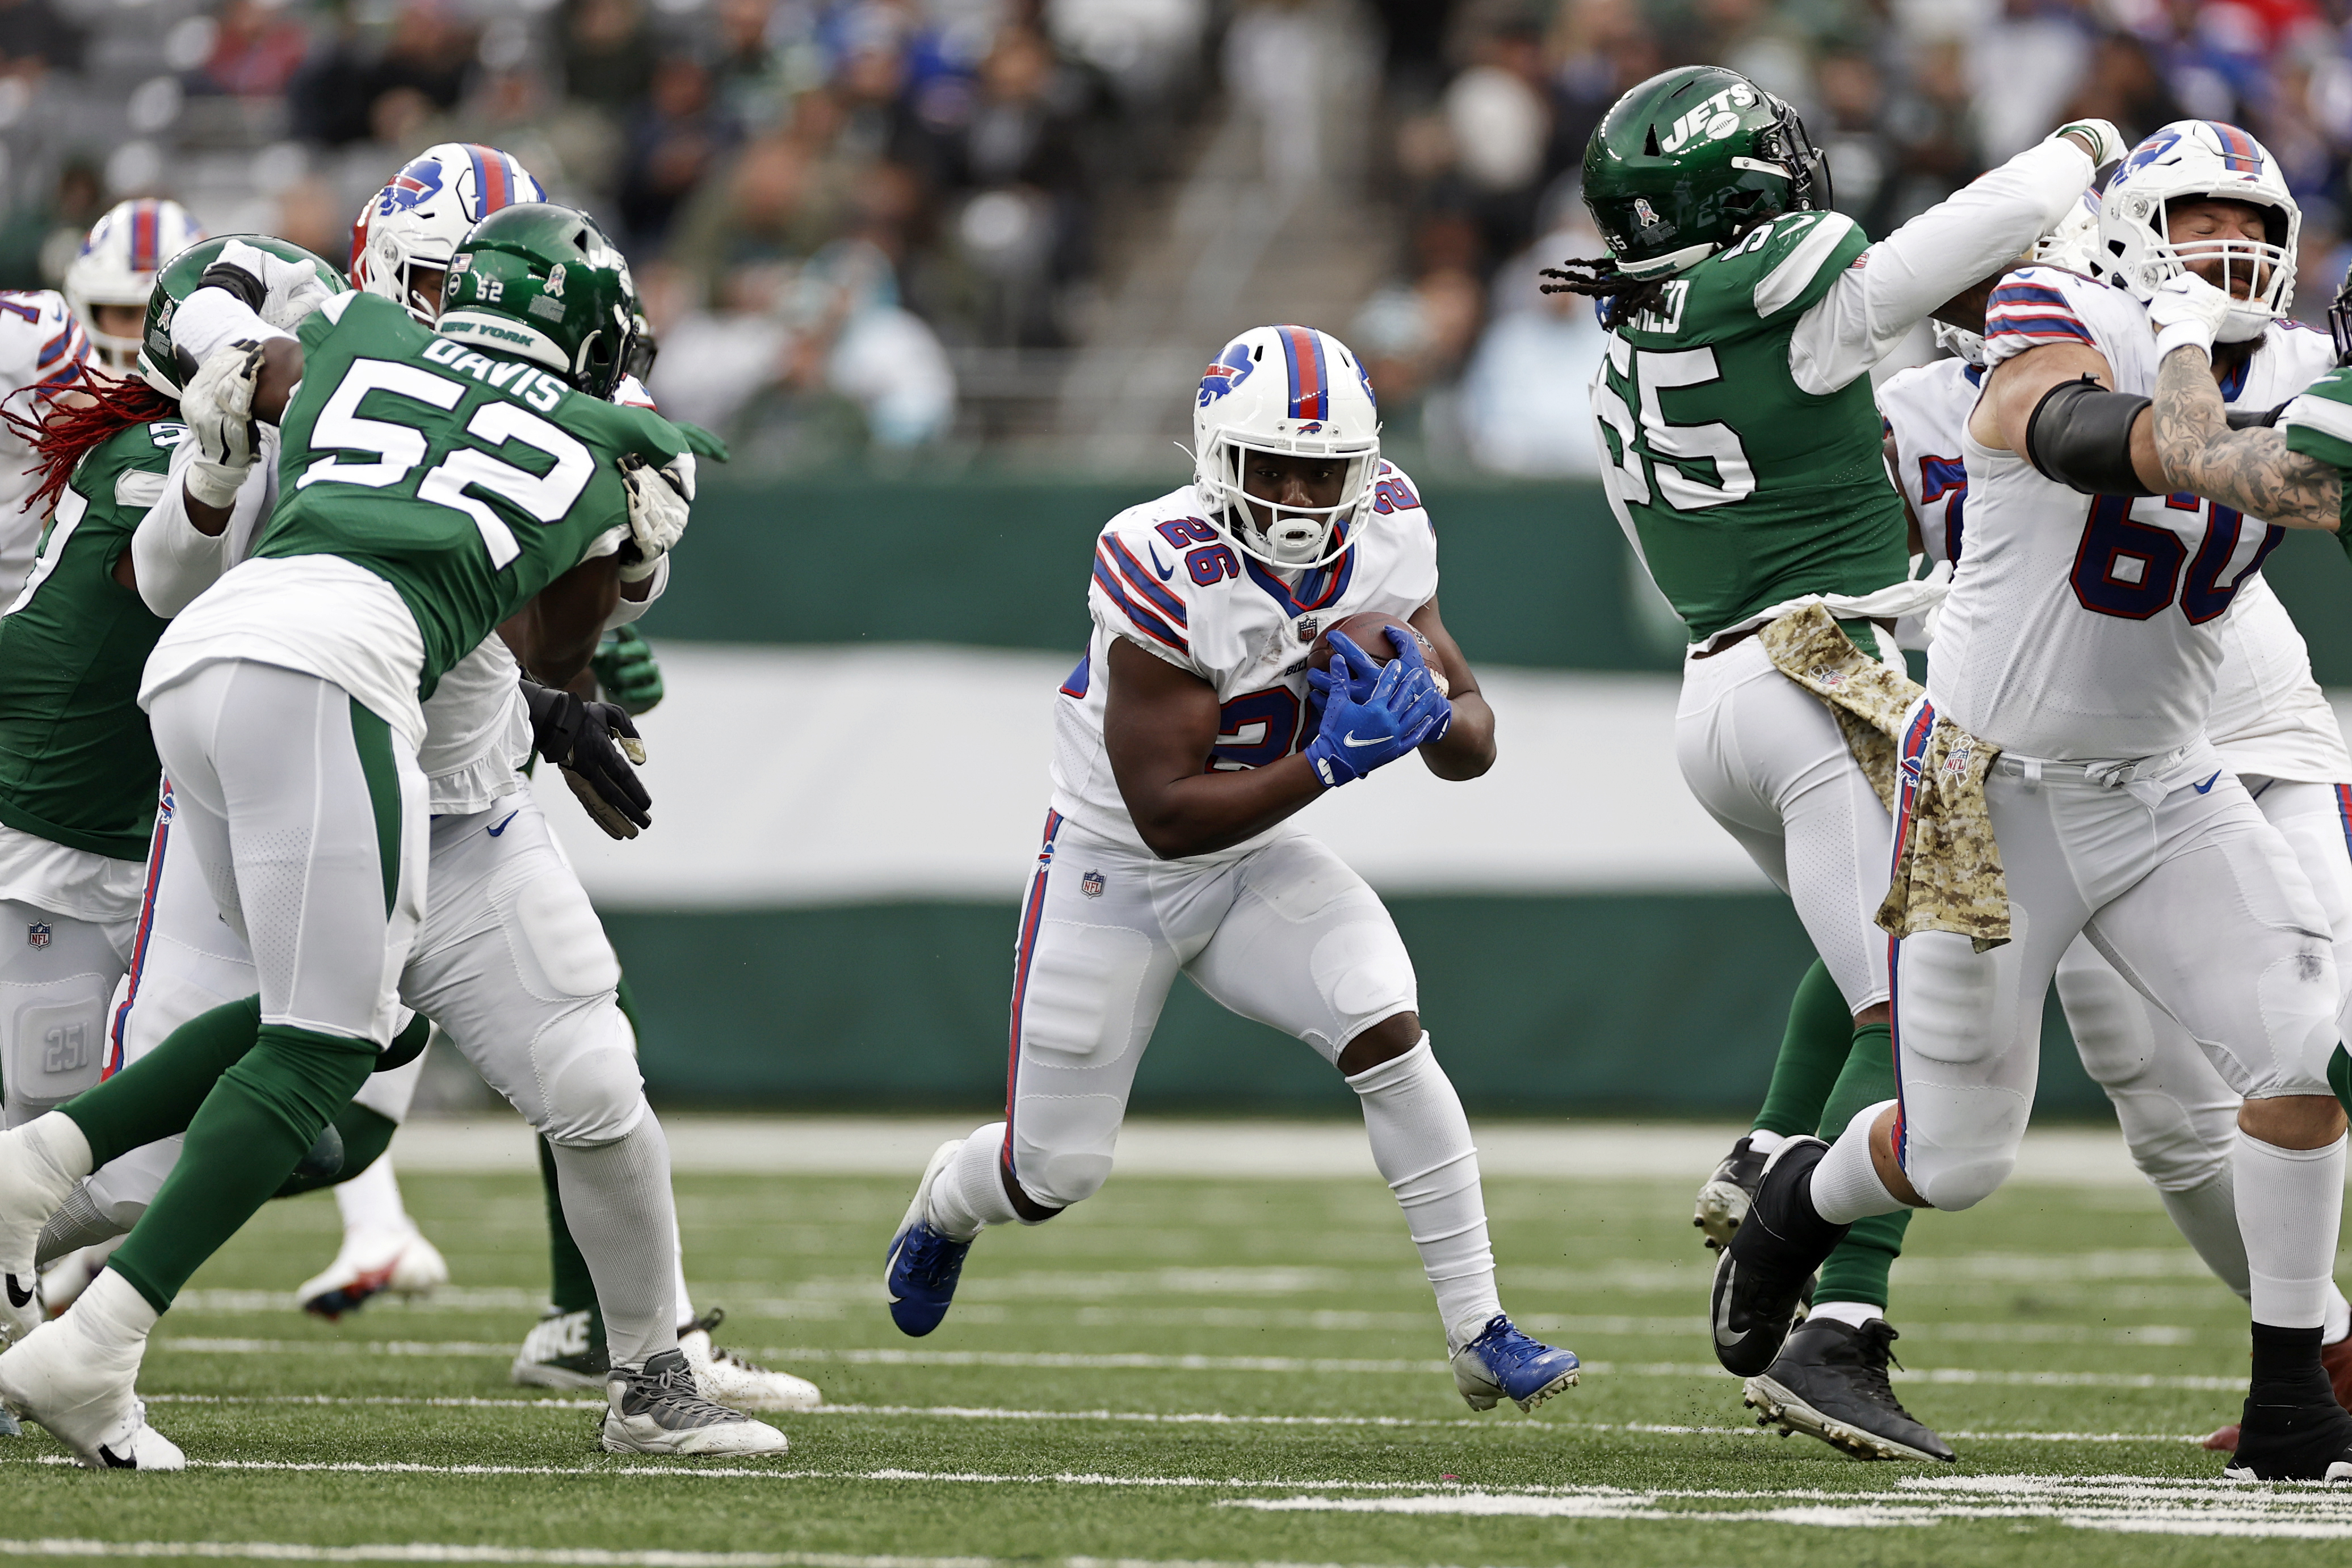 Jets vs. Bills 2022 prediction, odds: Another upset in the cards?